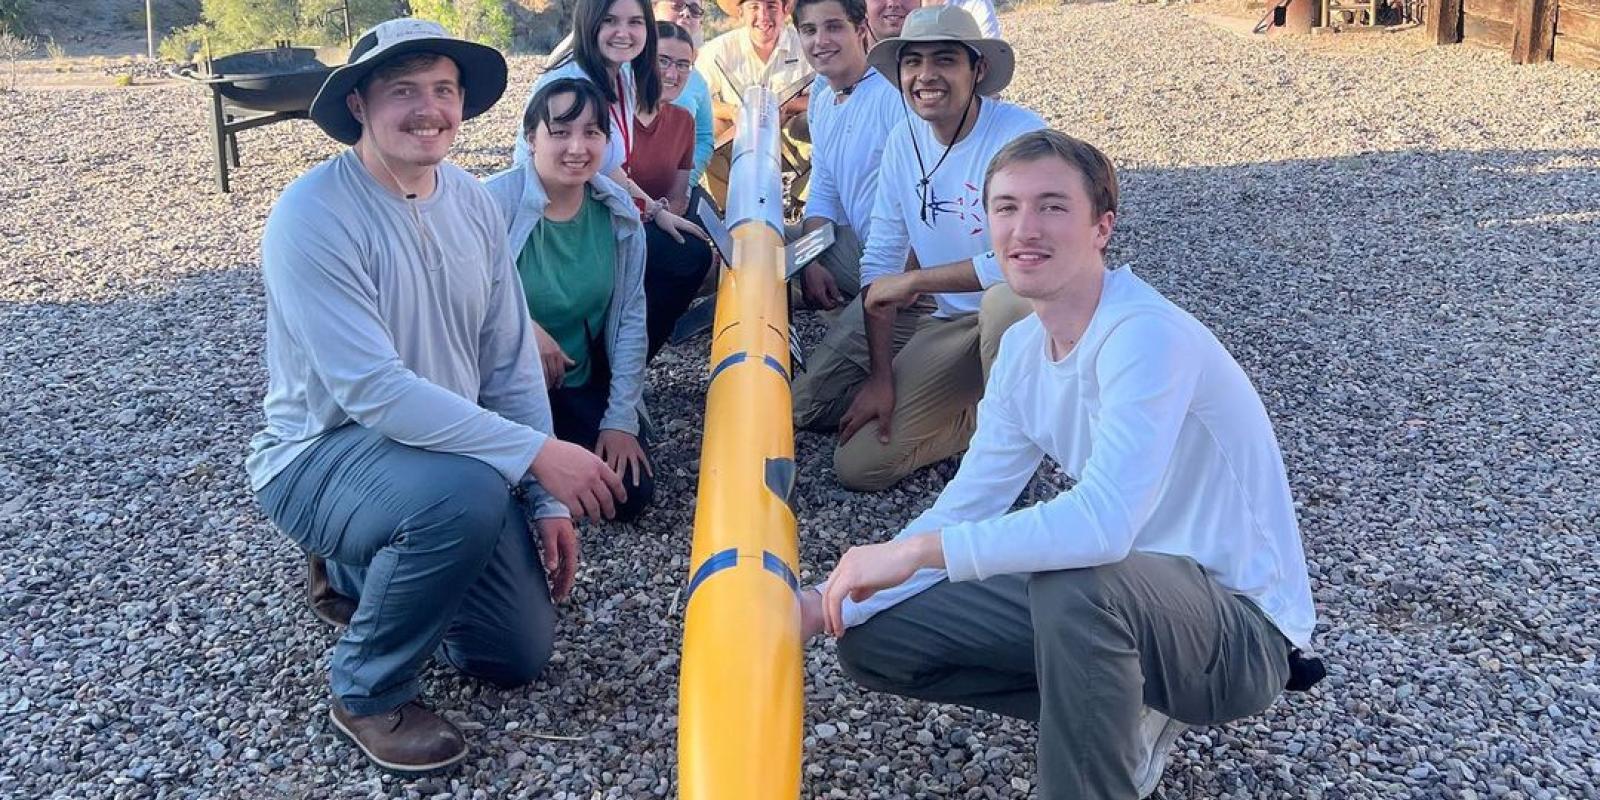 Members of the UM-Dearborn rocket team pose for a photo with their rocket in the New Mexico desert, with mountains in the background.